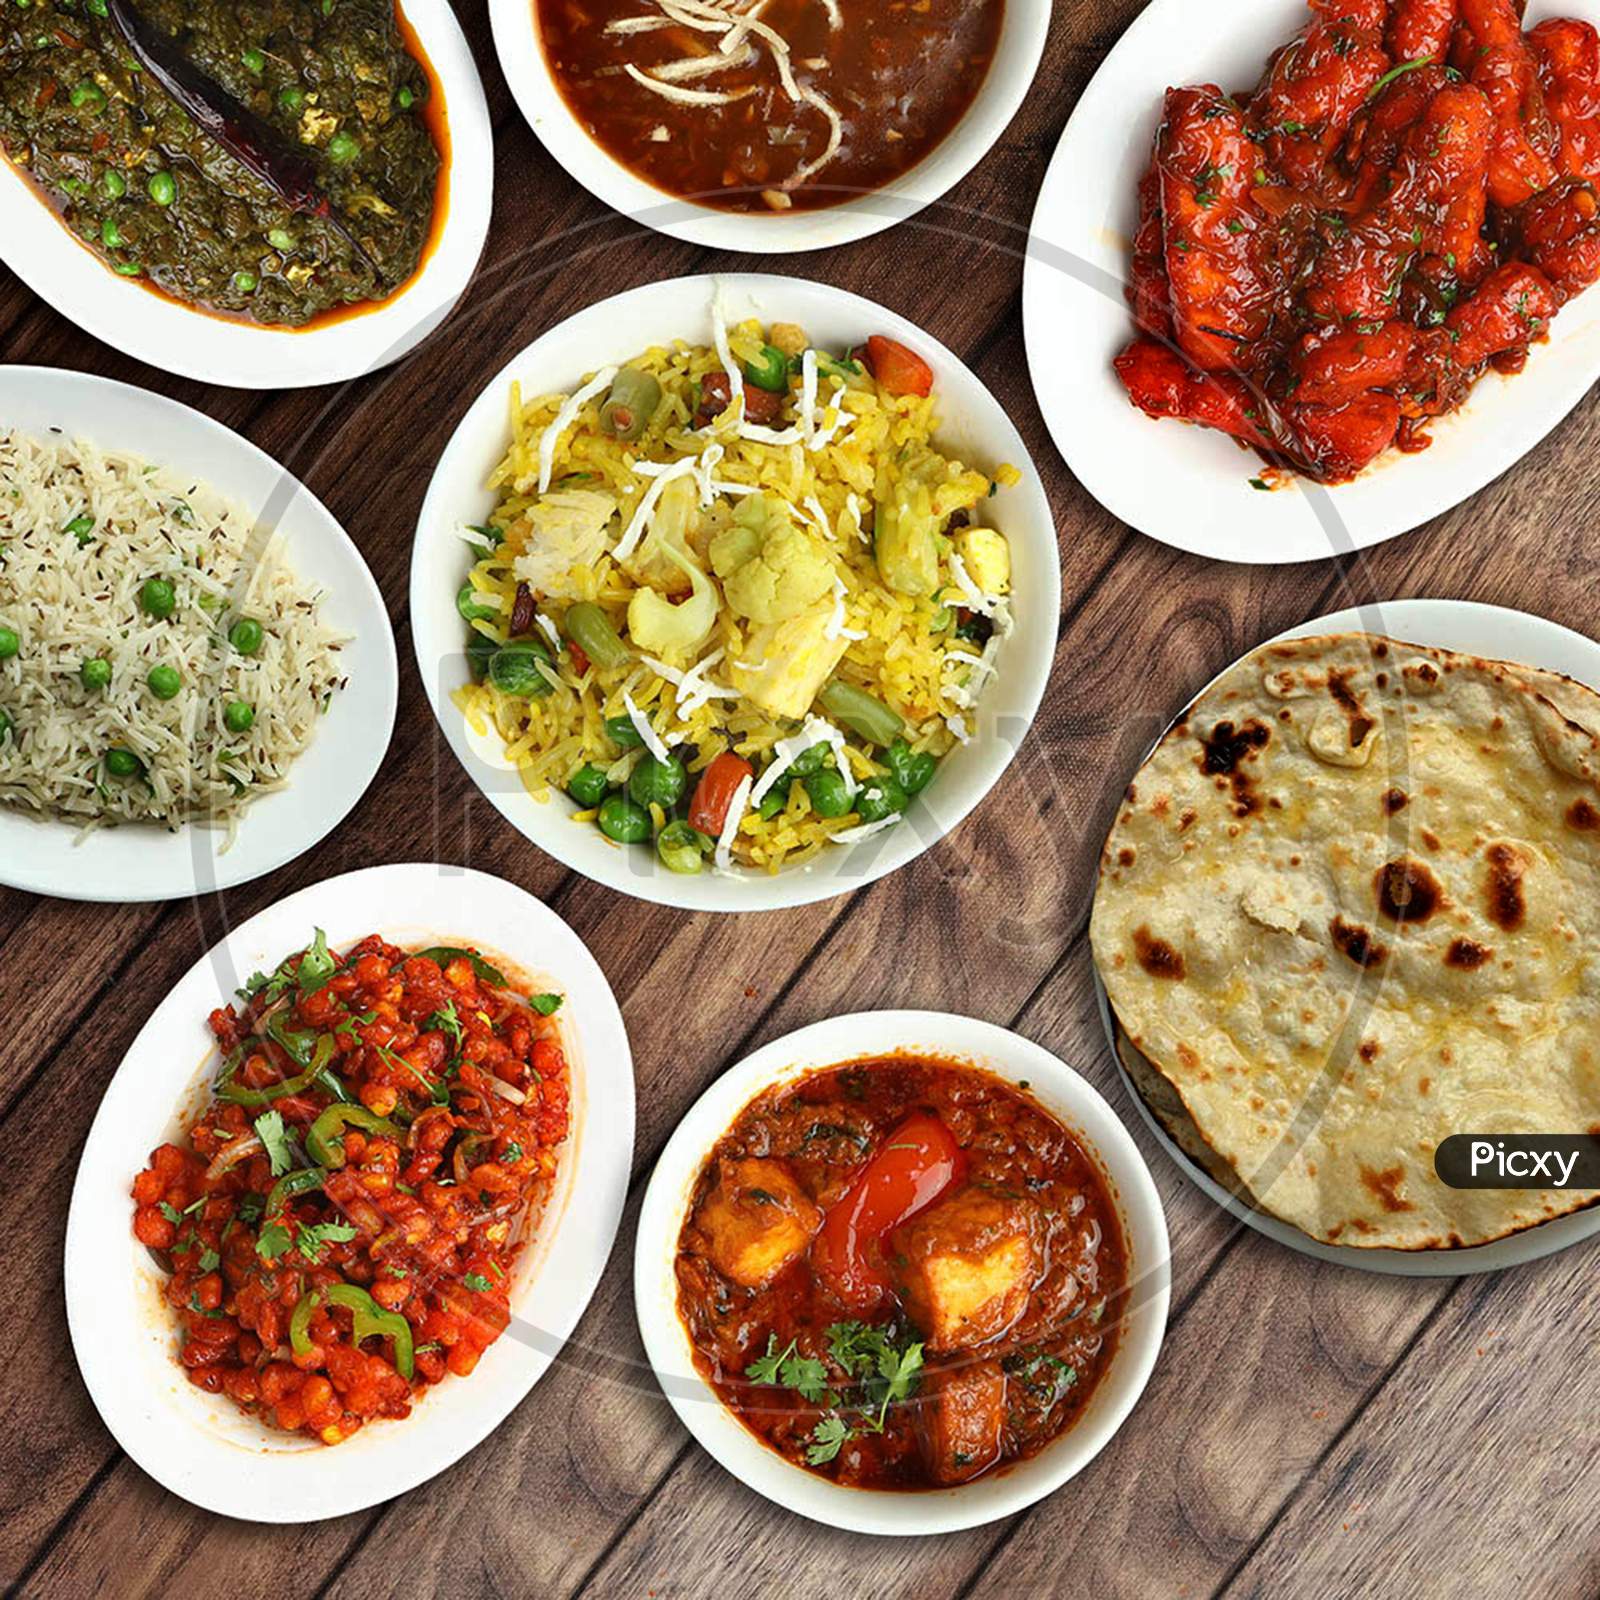 Assorted Indian Foods Veg Biryani,Crispy Corn,Crispy Paneer And Butter Naan On Wooden Background. Dishes And Appetizers Of Indian Cuisine